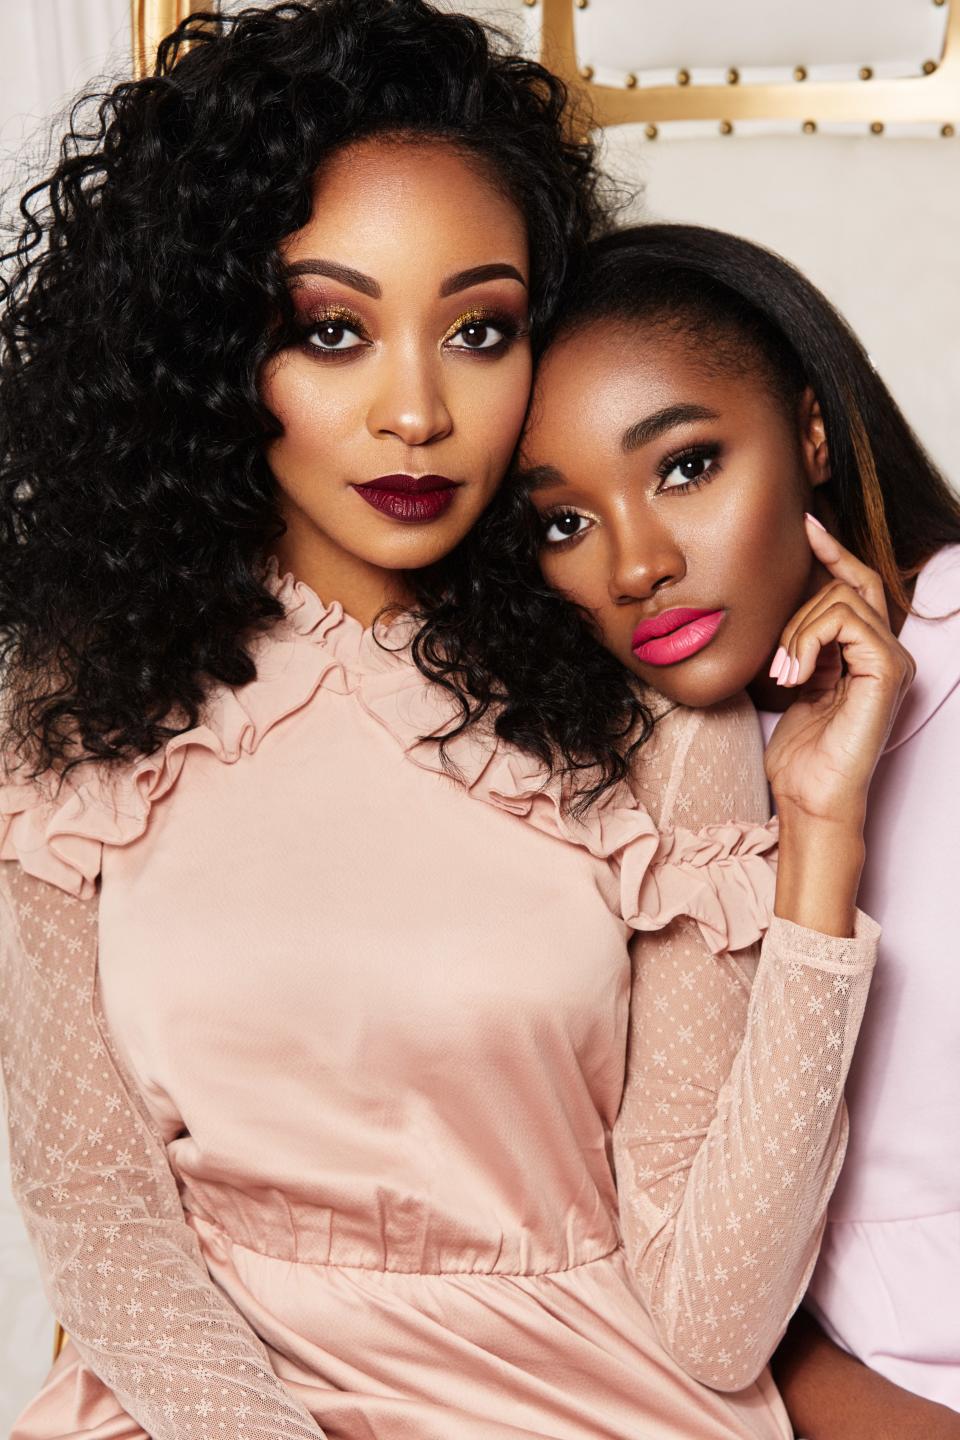 Beauty Bakerie founder Cashmere Nicole talked to Allure.com writer Shammara Lawrence about taking her beauty brand from a passion project to a business built on diversity.